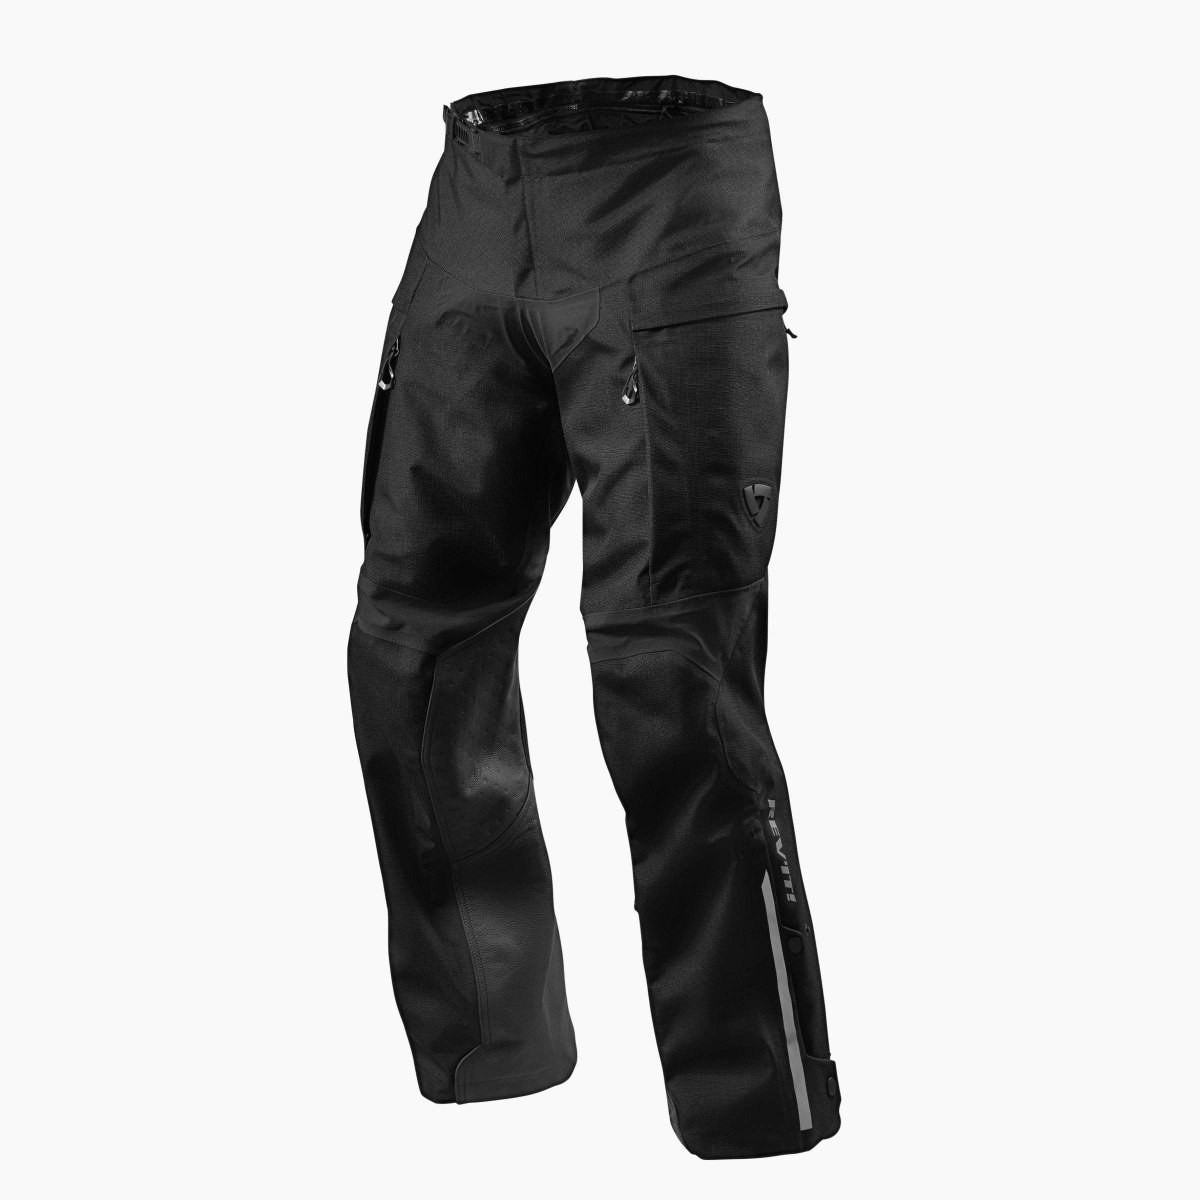 Image of REV'IT! Component H2O Long Black Motorcycle Pants Size L ID 8700001317801